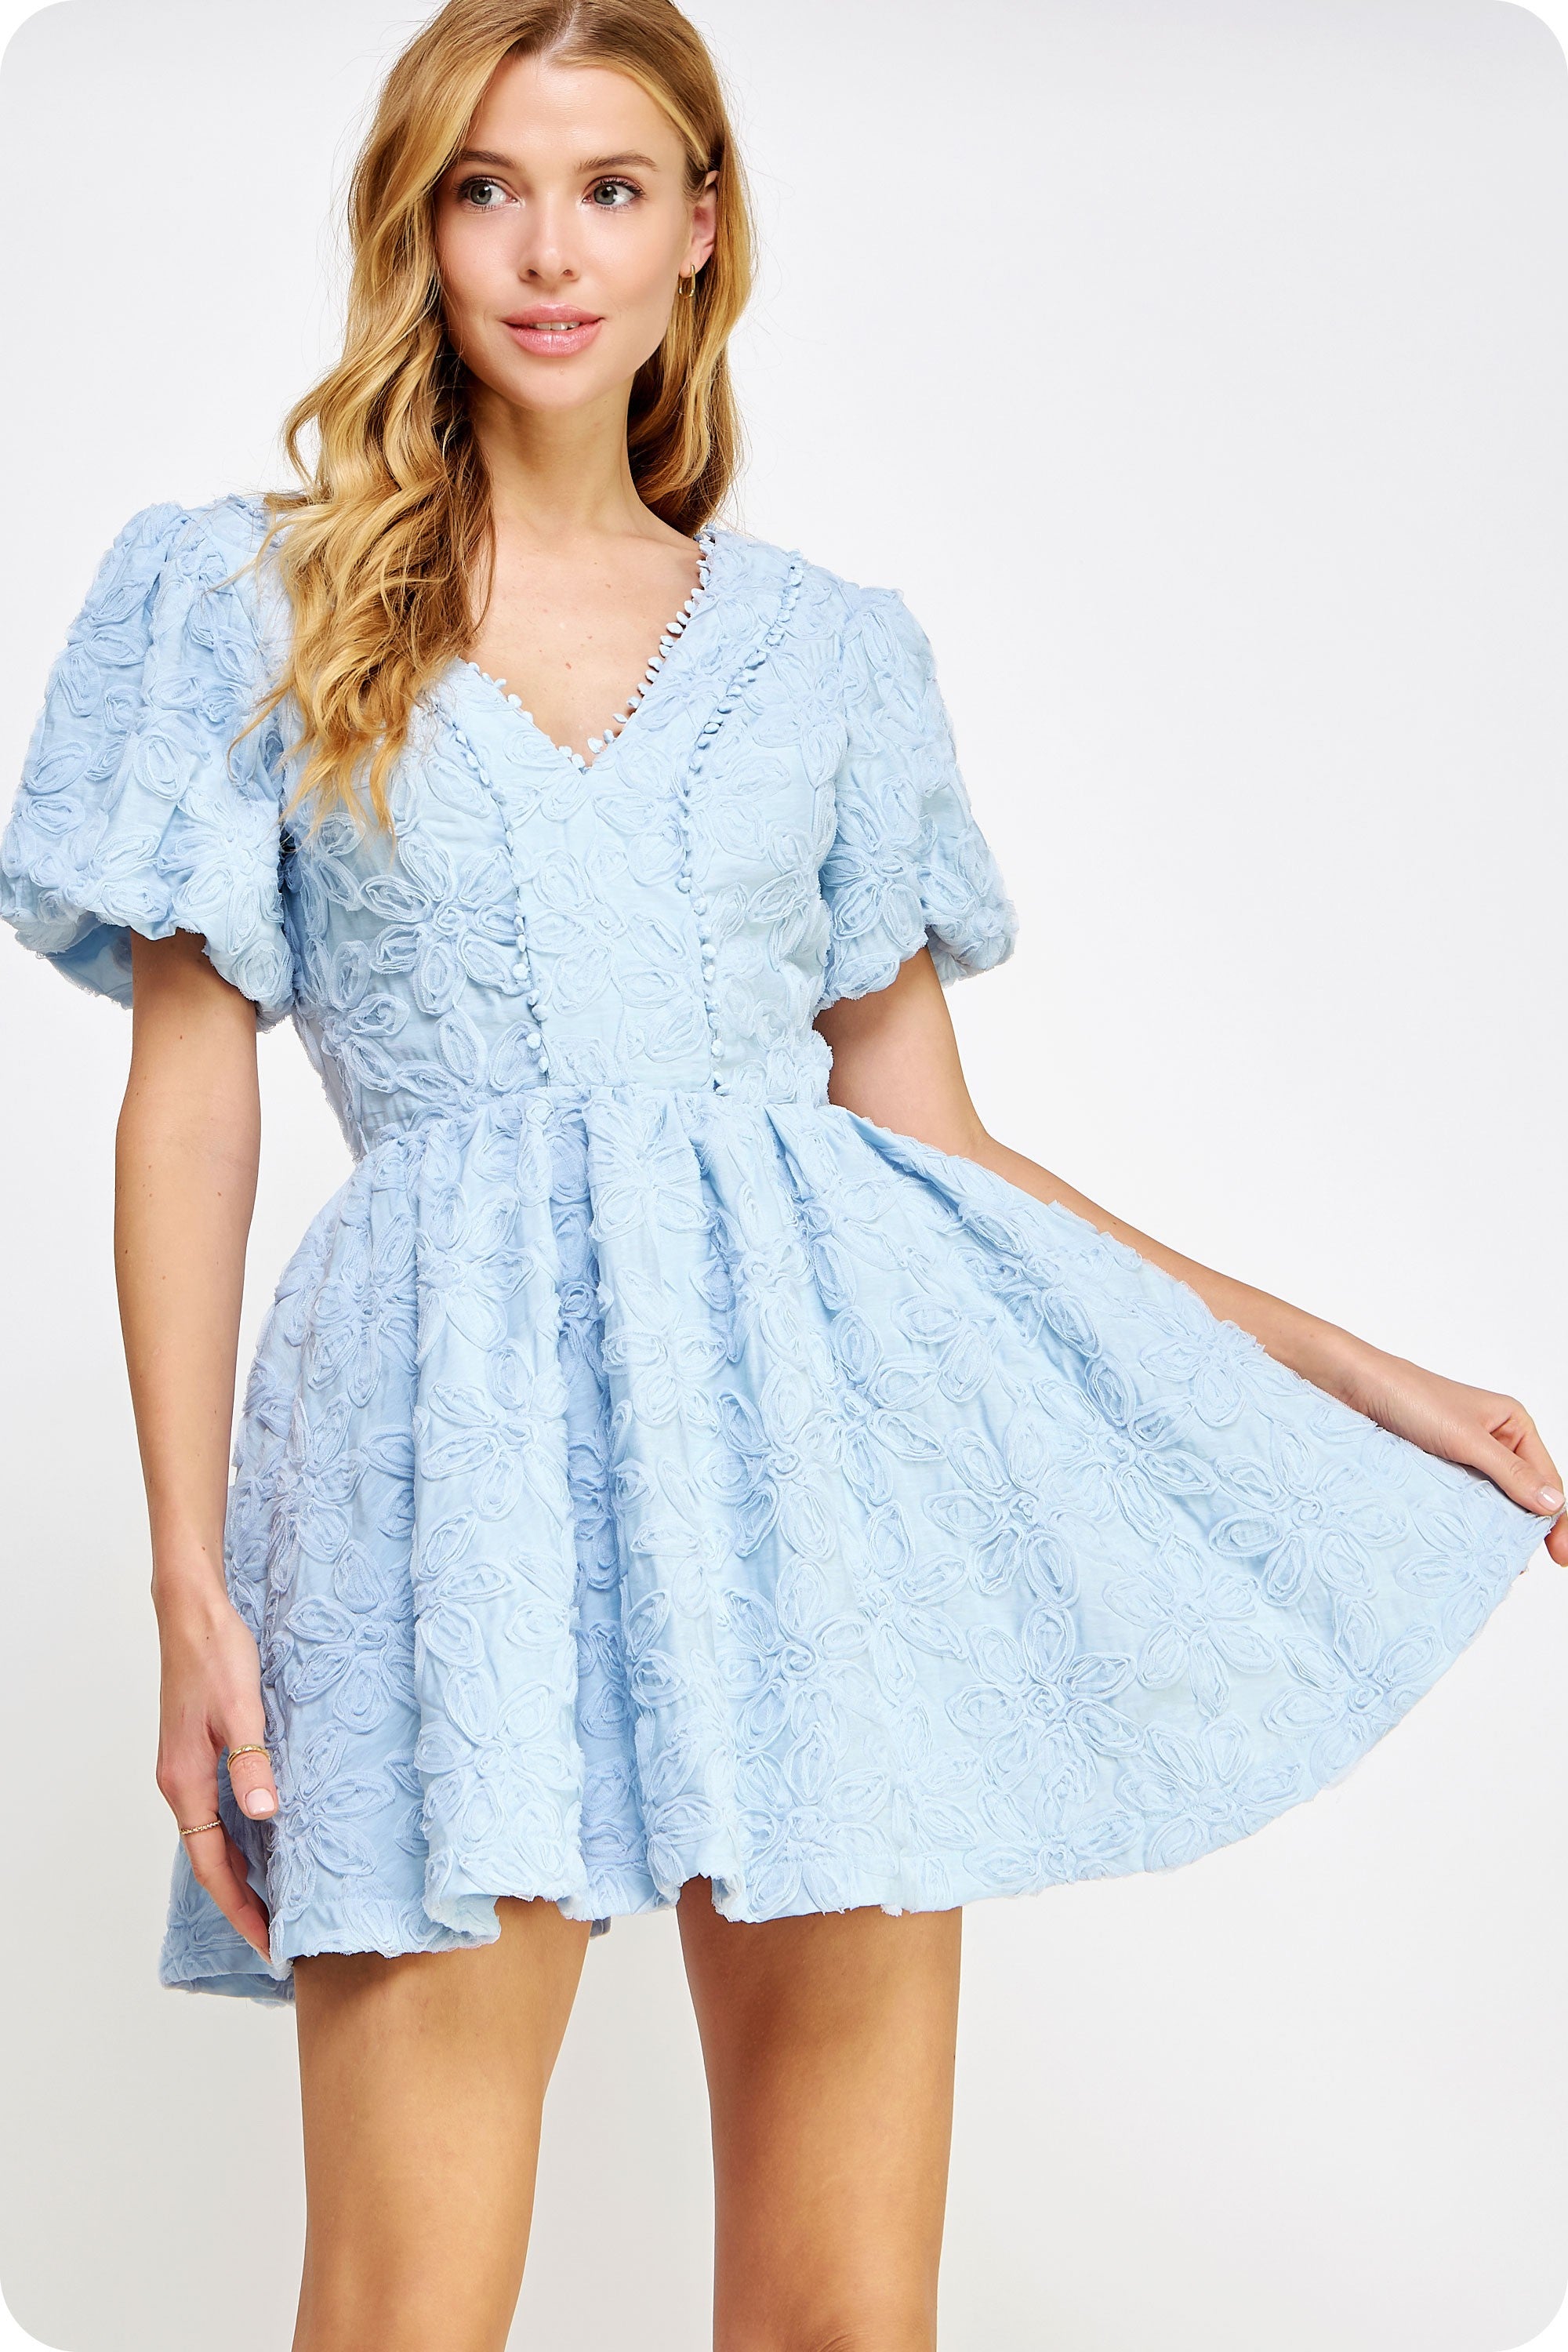 MINCY TEXTURE TULLE MINI DRESS IN AIRY BLUE